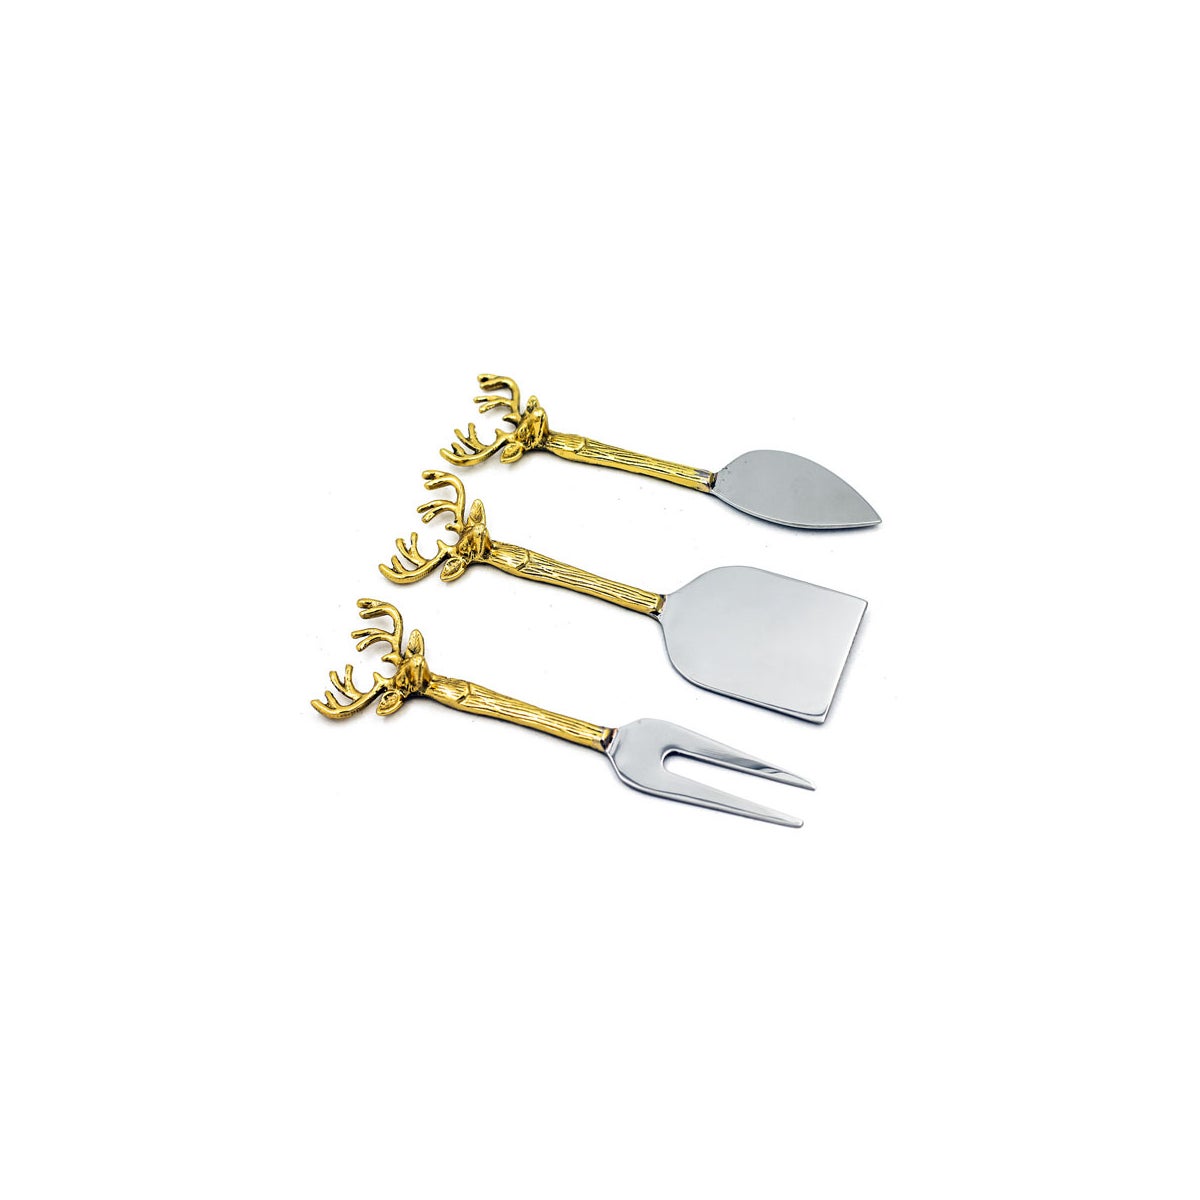 Gold Dear Head Shaped Handle Cheese Set of 3